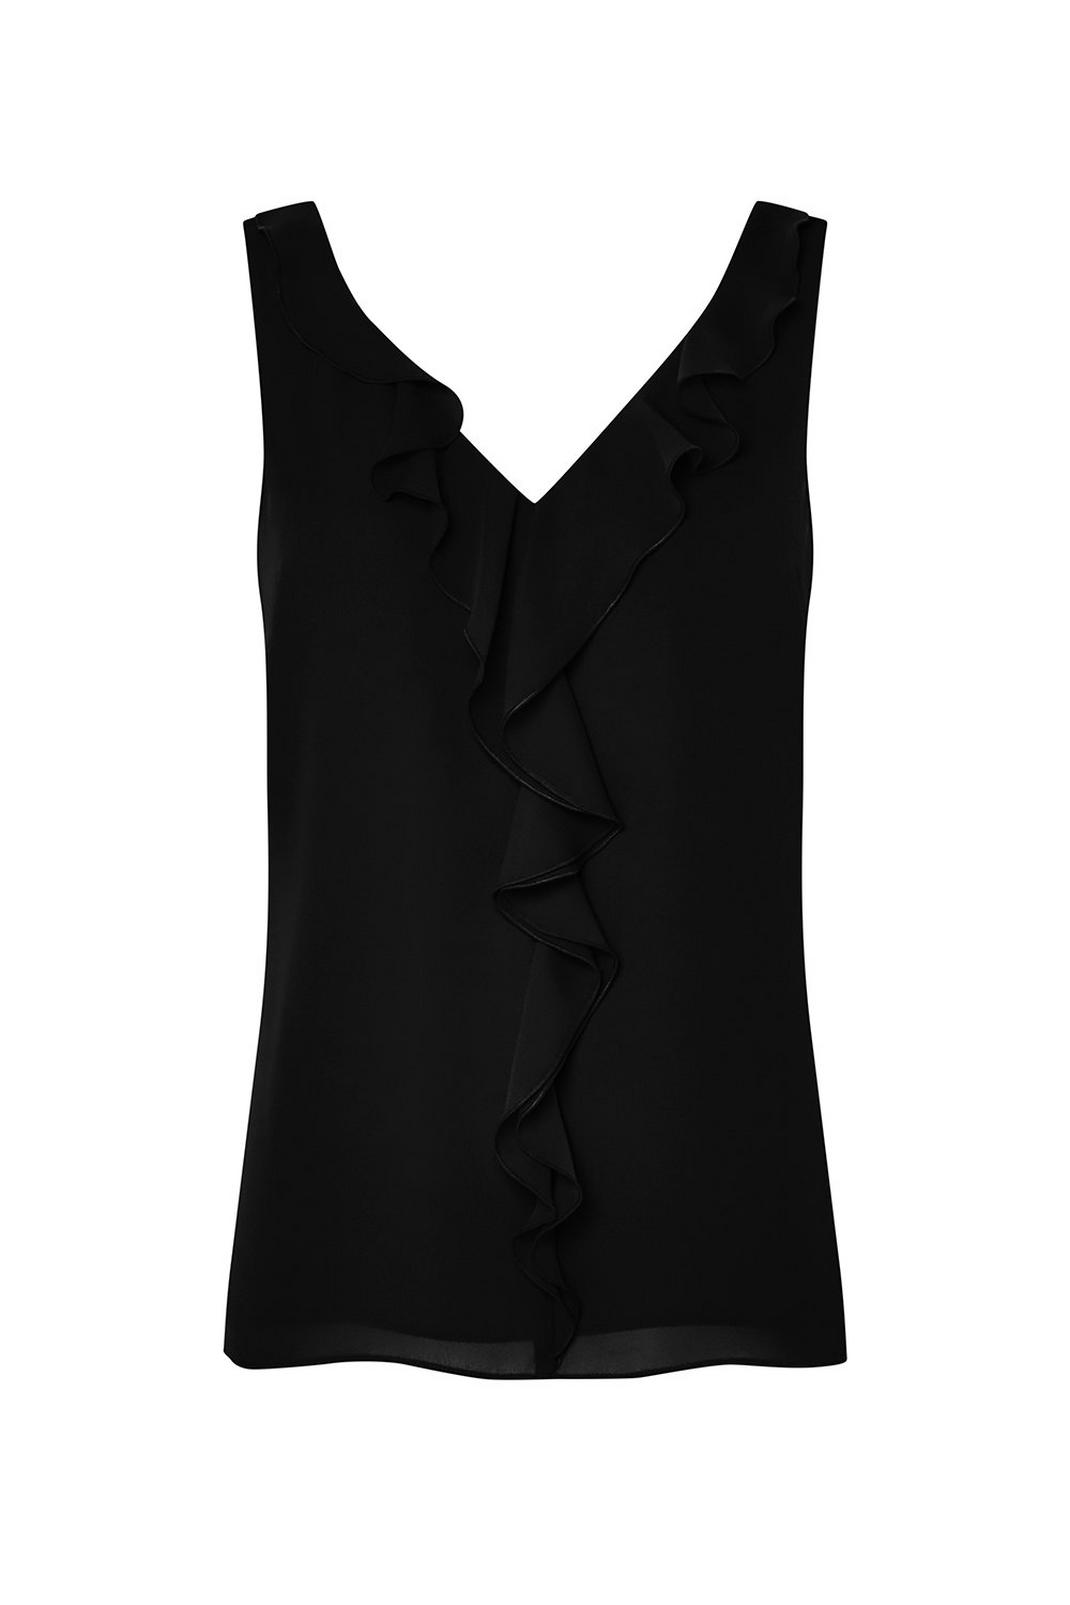 105 PETITE Black Ruffle Front Camisole Top image number 2